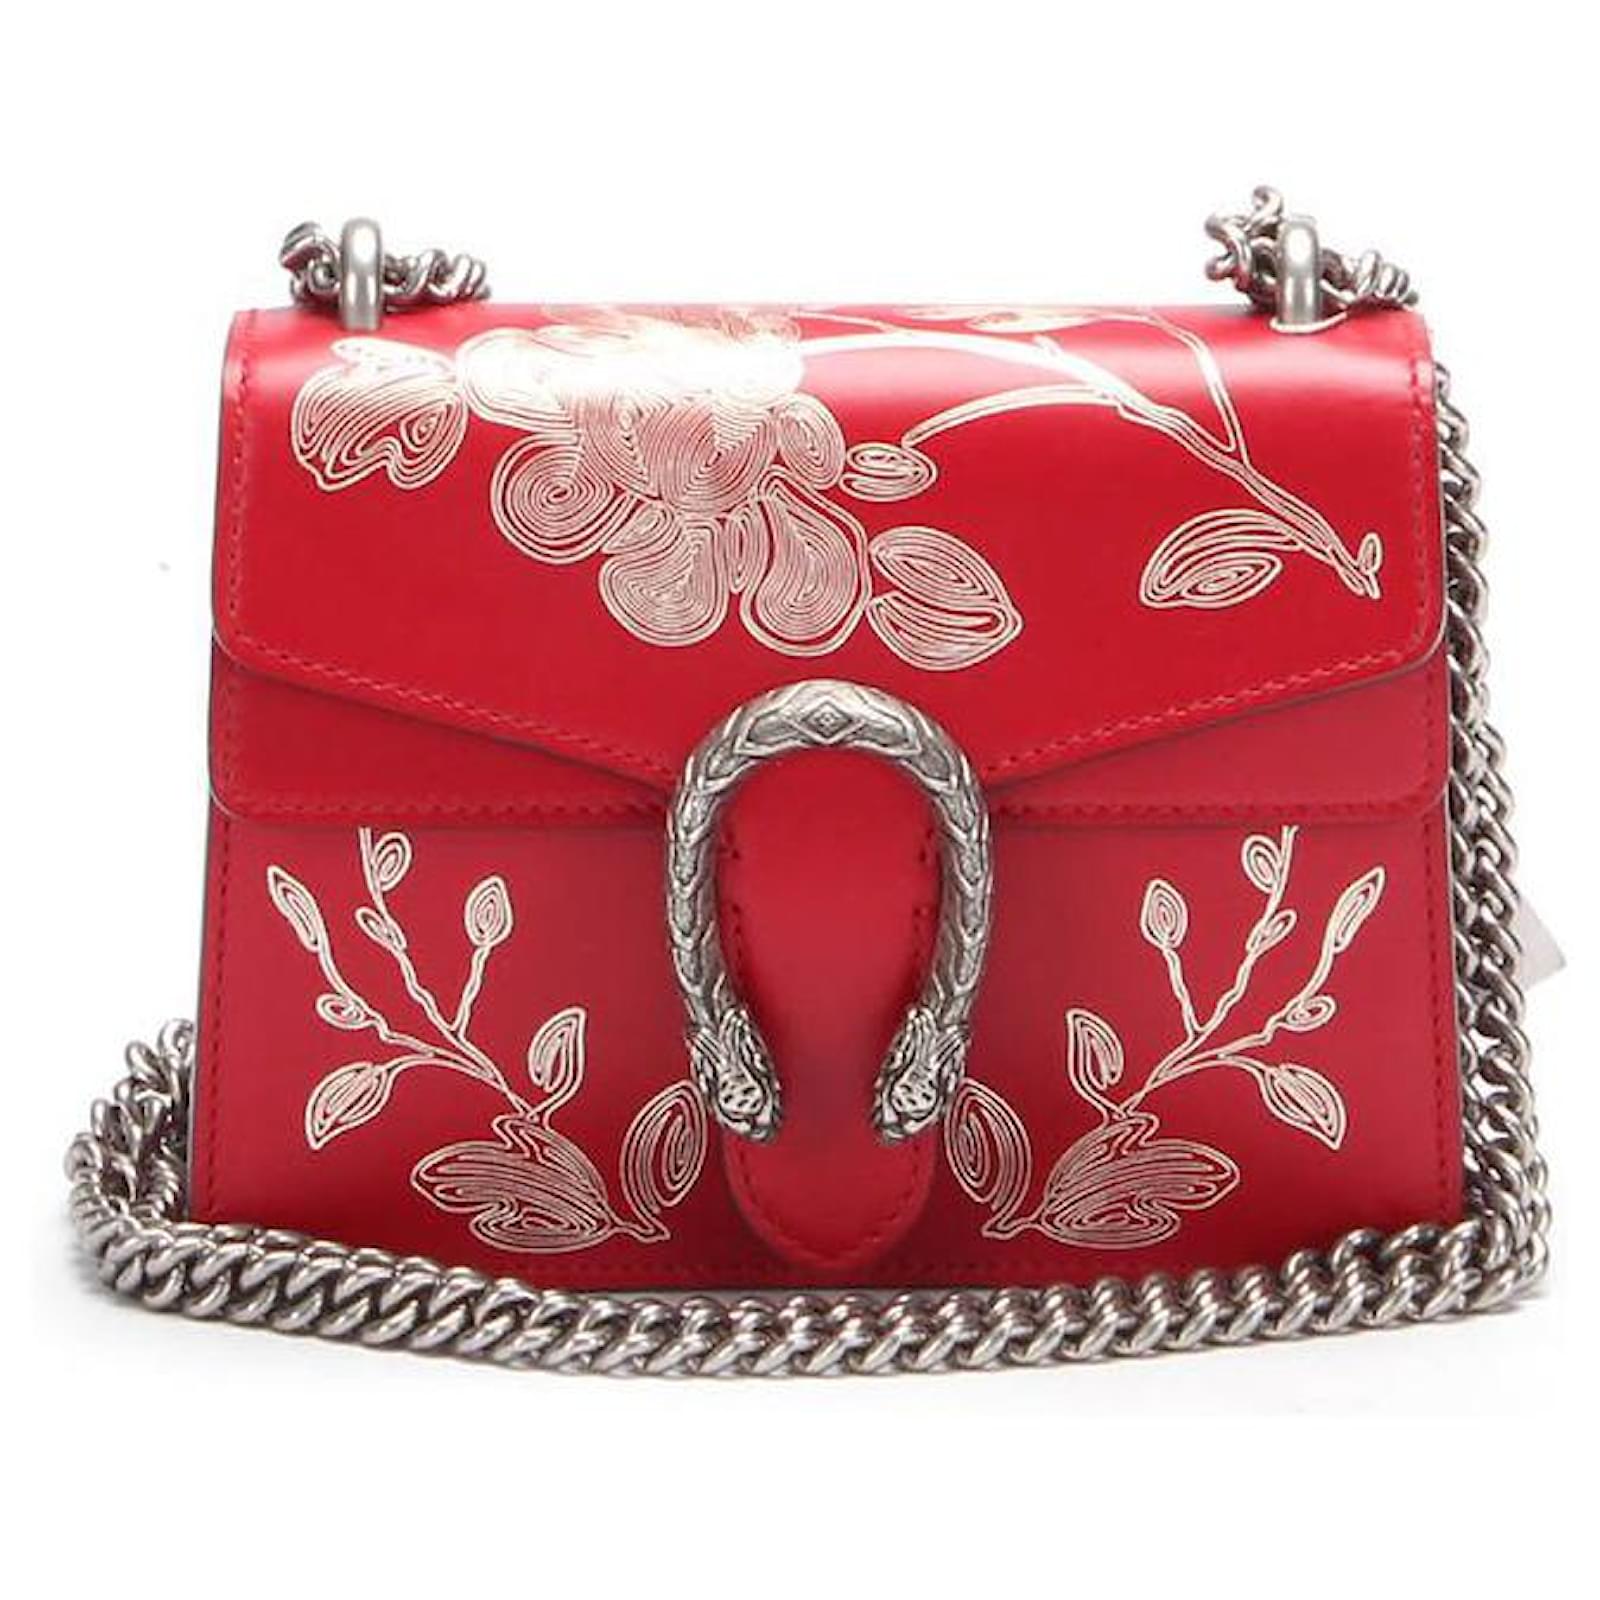 Gucci Red Leather Chinese New Year Mini Dionysus Shoulder Bag